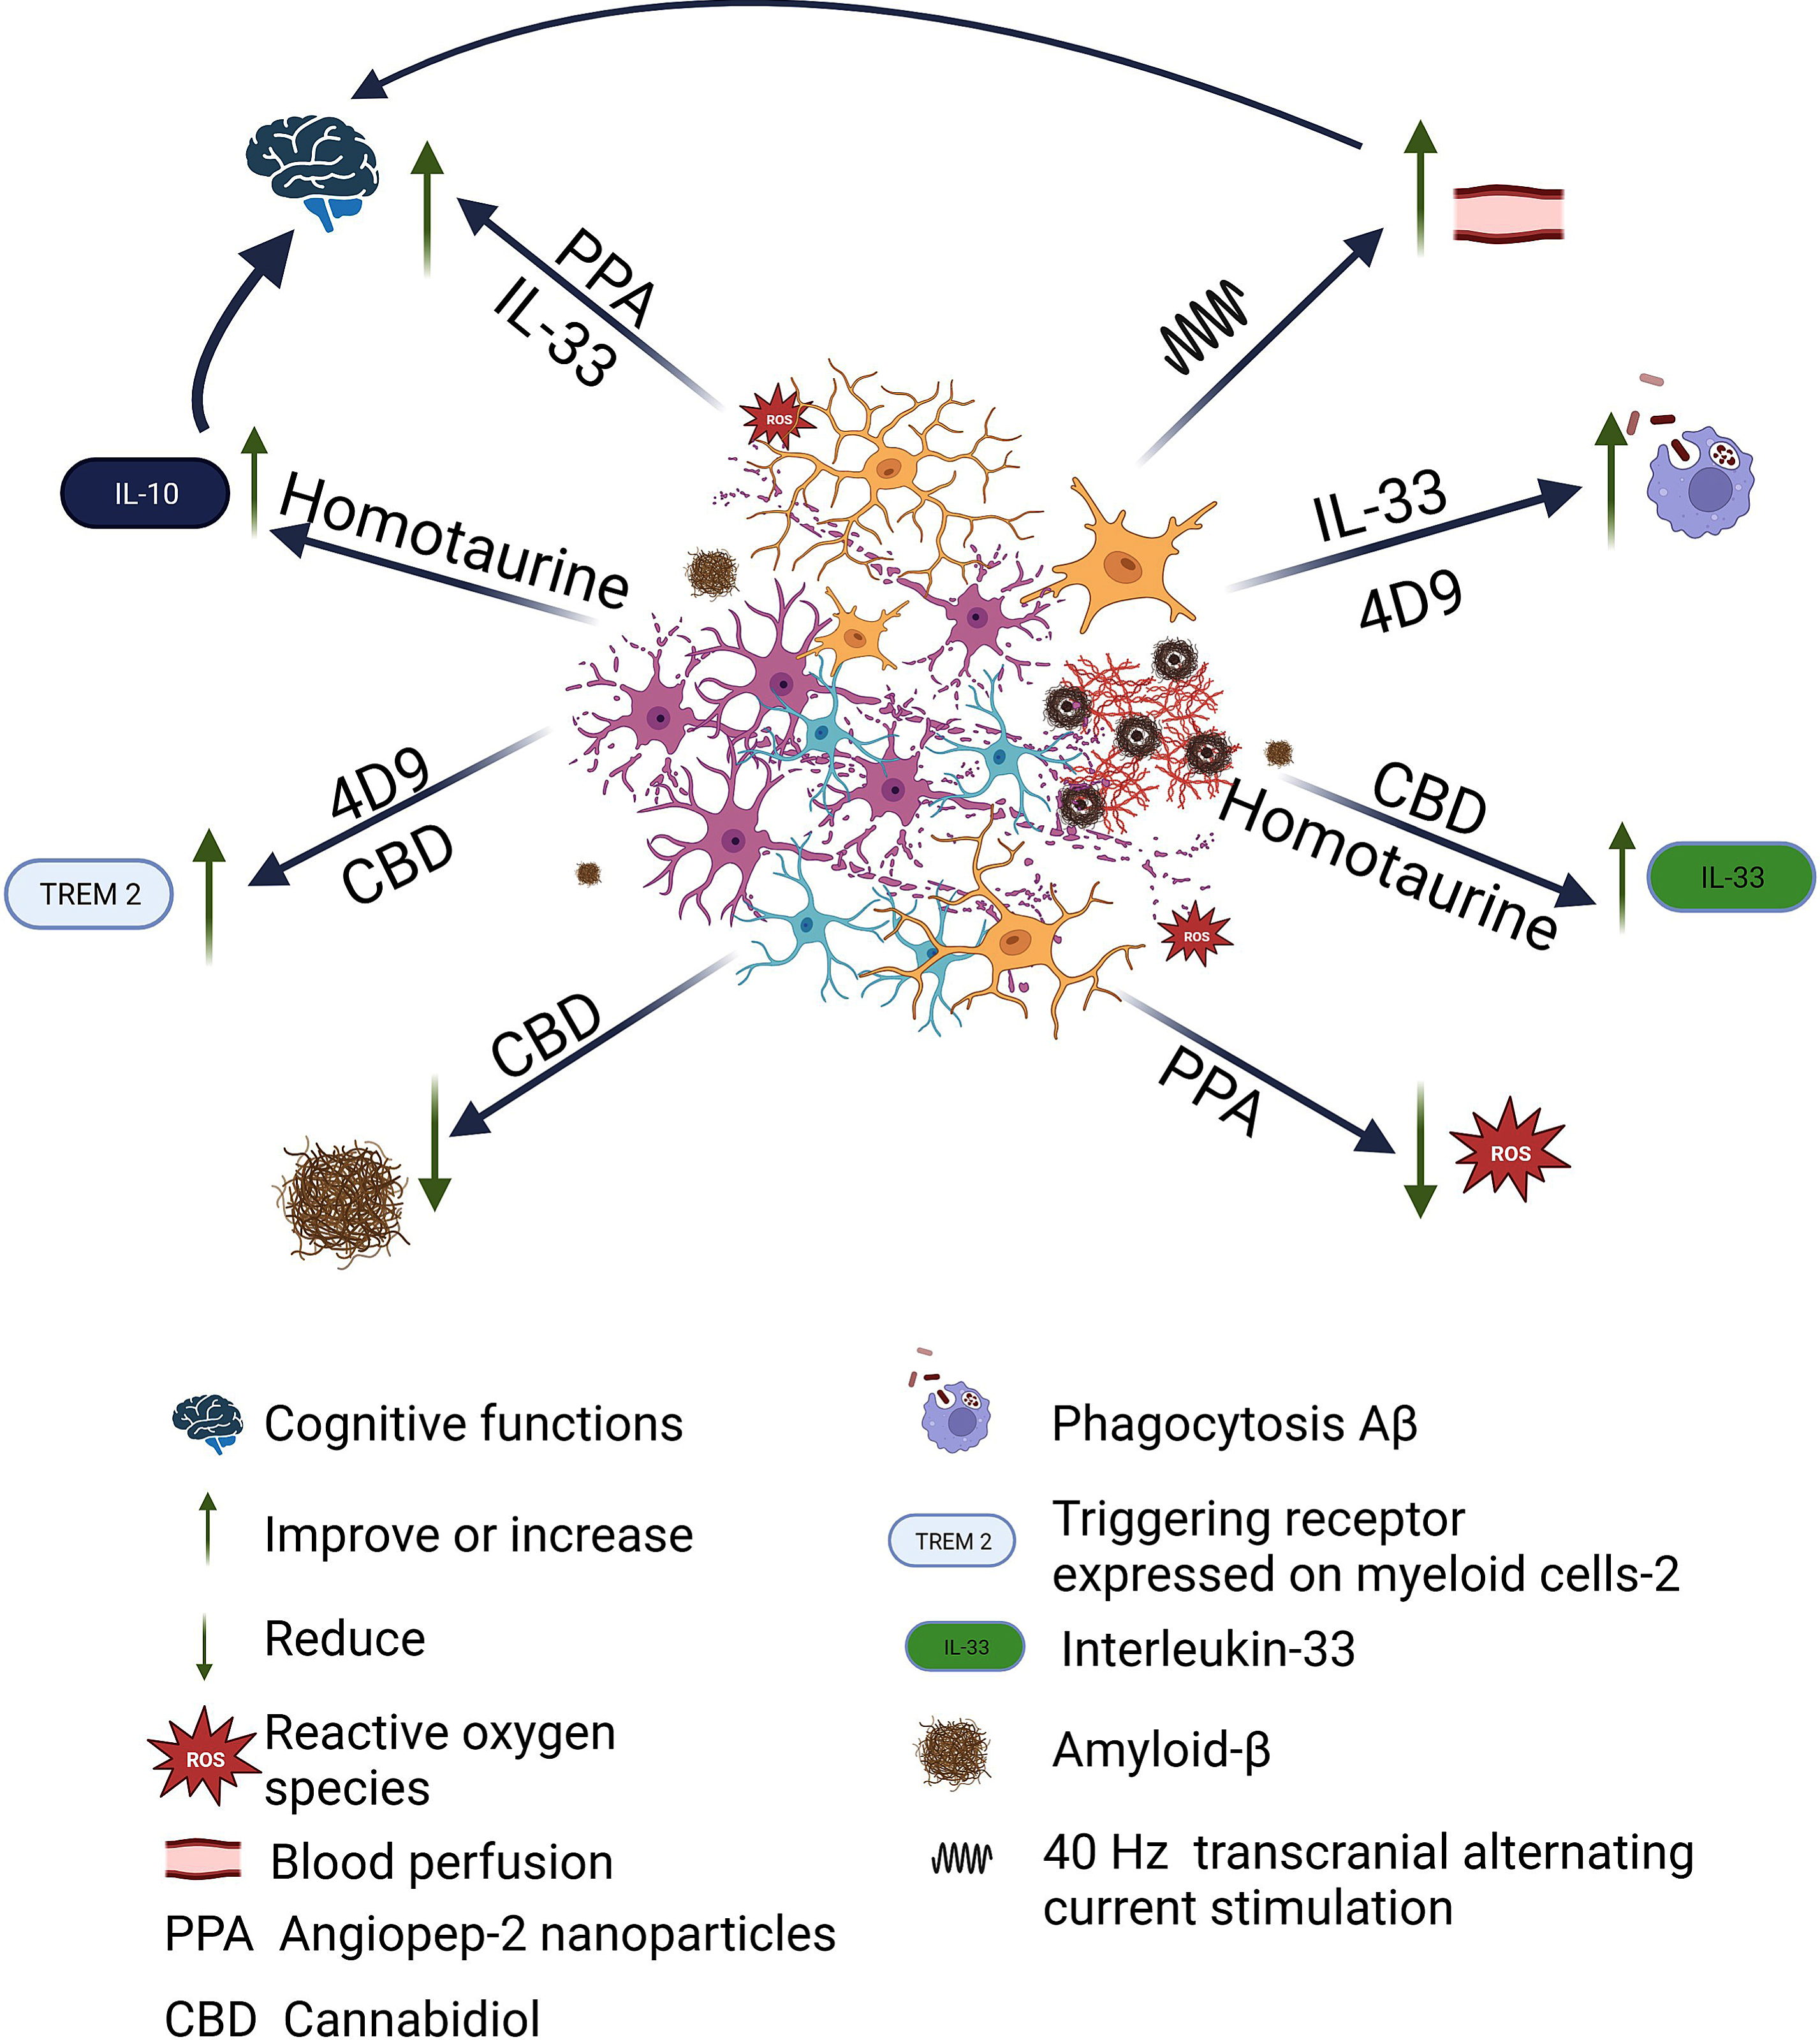 Beneficial effects of therapeutic strategies developed against AD related to microglia. Once Aβ plaque begins to proliferate, the microglia rapidly become activated, change shape, and begin to phagocytose harmful substances, but also begin to phagocytose neurons. There is loss of neurons and synapses, accumulation of Aβ, neurofibrillary tangles, and ROS. Different strategies targeting microglia have been tested, which have shown different beneficial effects. Angiopep-2 nanoparticles exerting synergistic effects of eliminating ROS and rescuing the cognitive functions. 4D9, a monoclonal antibody, enhanced TREM2 function resulting in increased phagocytosis of Aβ and myelin in vitro. Cannabidiol elevated IL-33 and TREM2 expression in glial cells while suppressing proinflammatory IL-6 expression in peripheral blood leukocytes in proportion to cognitive improvement and amyloid reduction was observed. With the administration of IL-33 treatment was observed that microglial phagocytosis and Aβ degradation are enhanced. Repetitive sessions of gamma tACS lead to a significant increase in cerebral blood flow in the temporal lobes, which contributes to global network dysfunction and by activating microglial waste removal and/or restoring perfusion in cortical areas deteriorated to ensure an adequate amount of nutrients and clearance of toxic products. Finally, Homotaurine shows increased serum levels of the anti-inflammatory cytokines IL-33 and IL-10 in the patients, which in turn appears related to improved episodic memory performances. Created with BioRender.com.